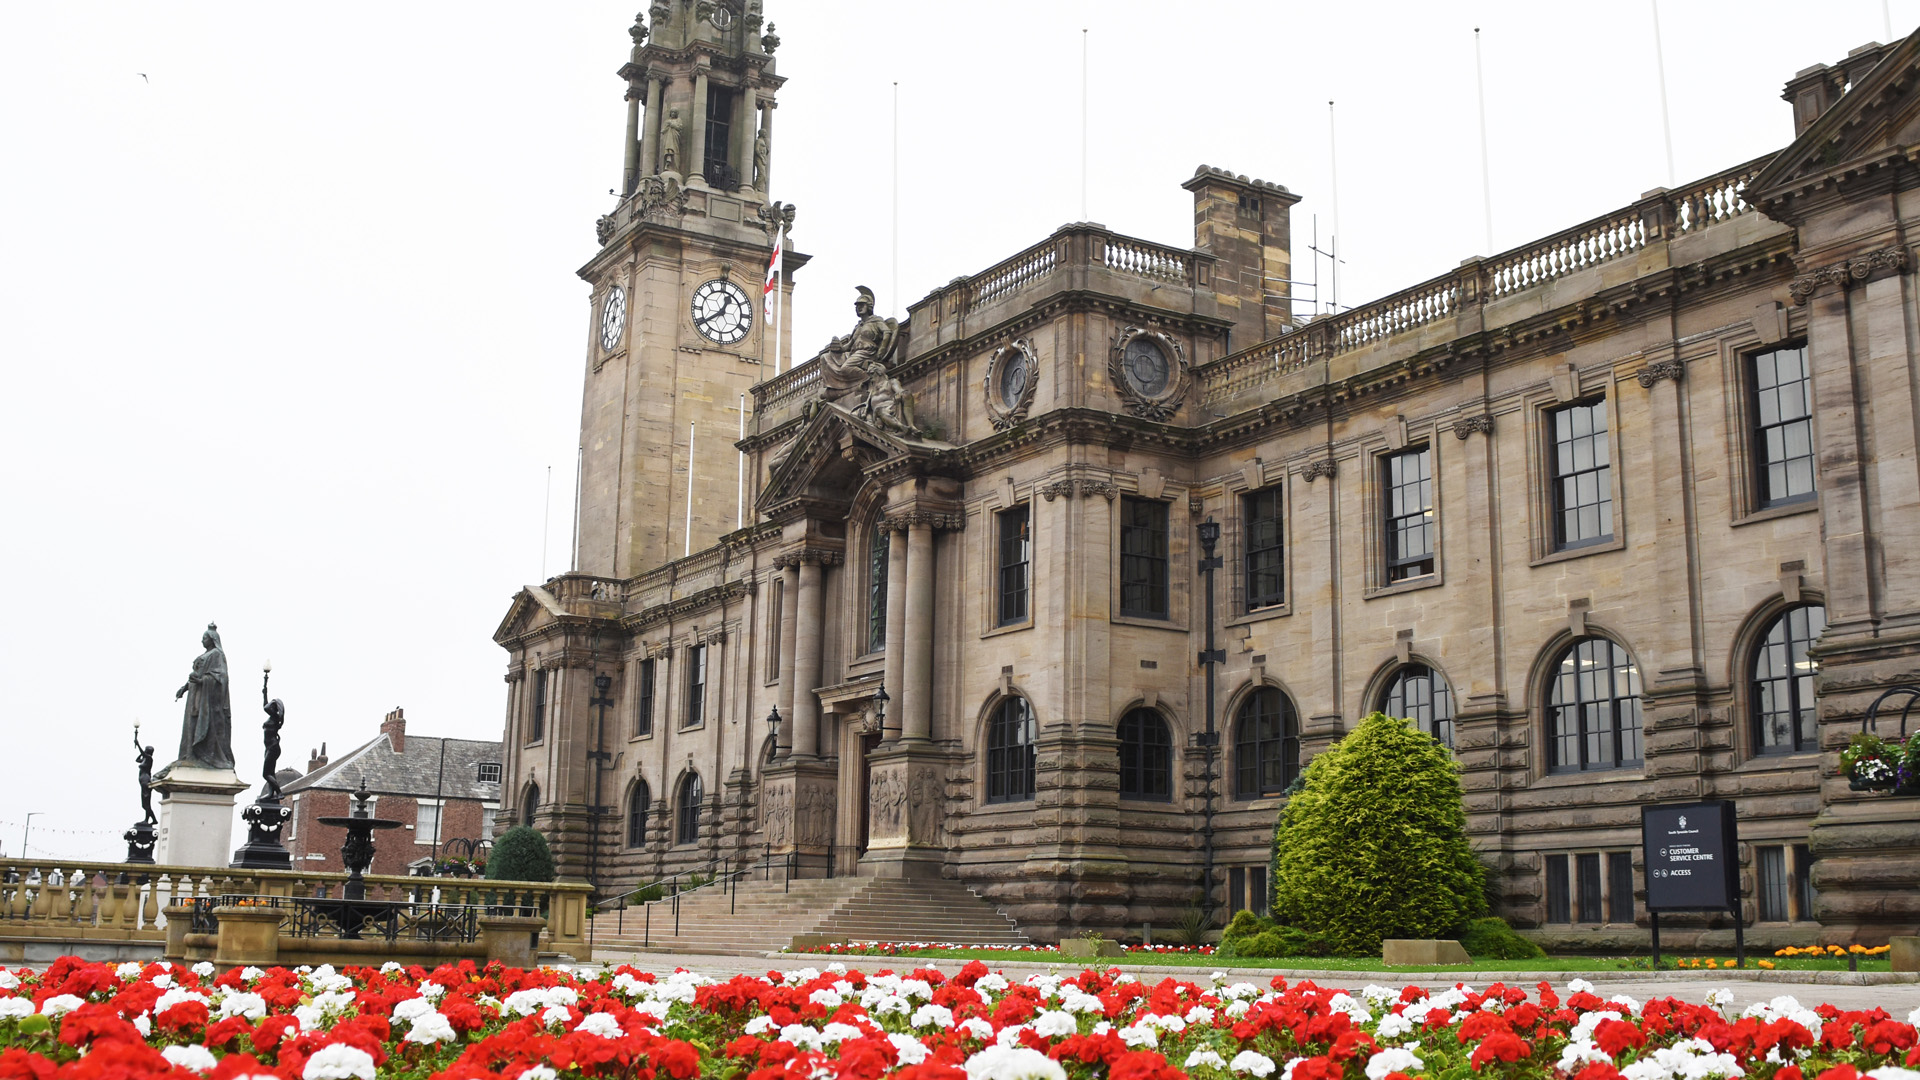 The outside of South Shields Town Hall, showing flowers in bloom